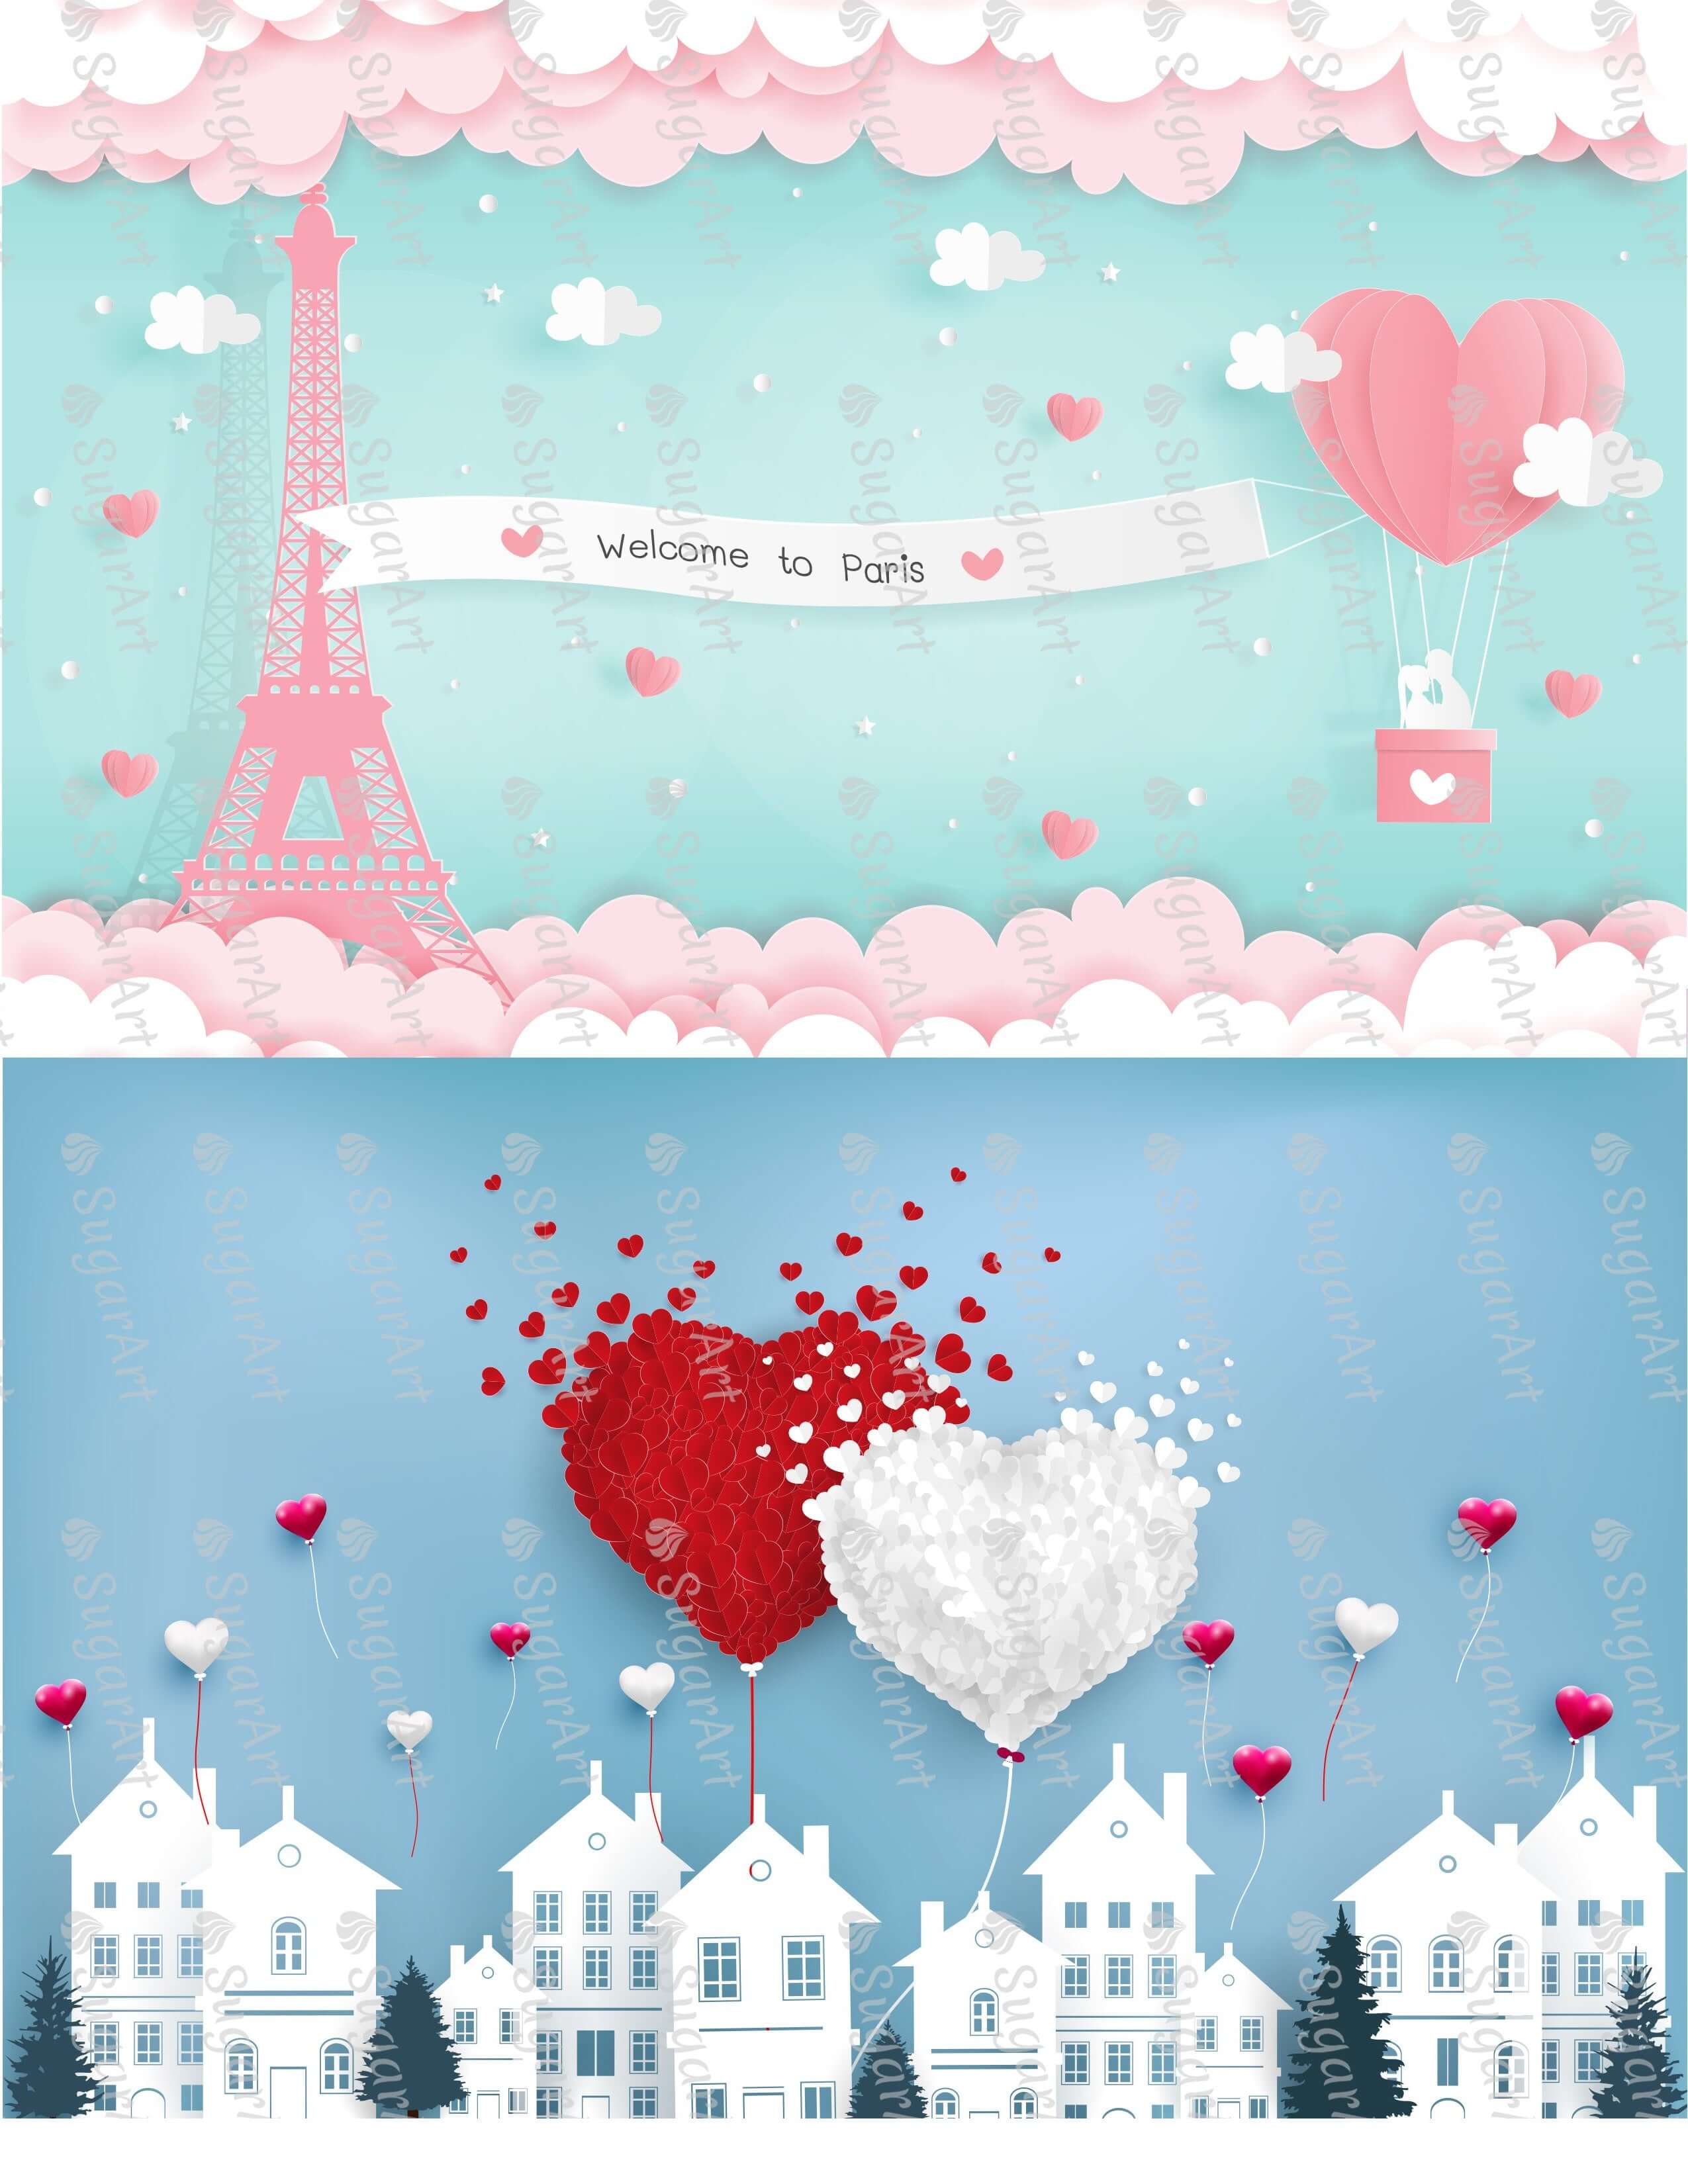 Two Romantic Illustrations - Icing - ISA219.